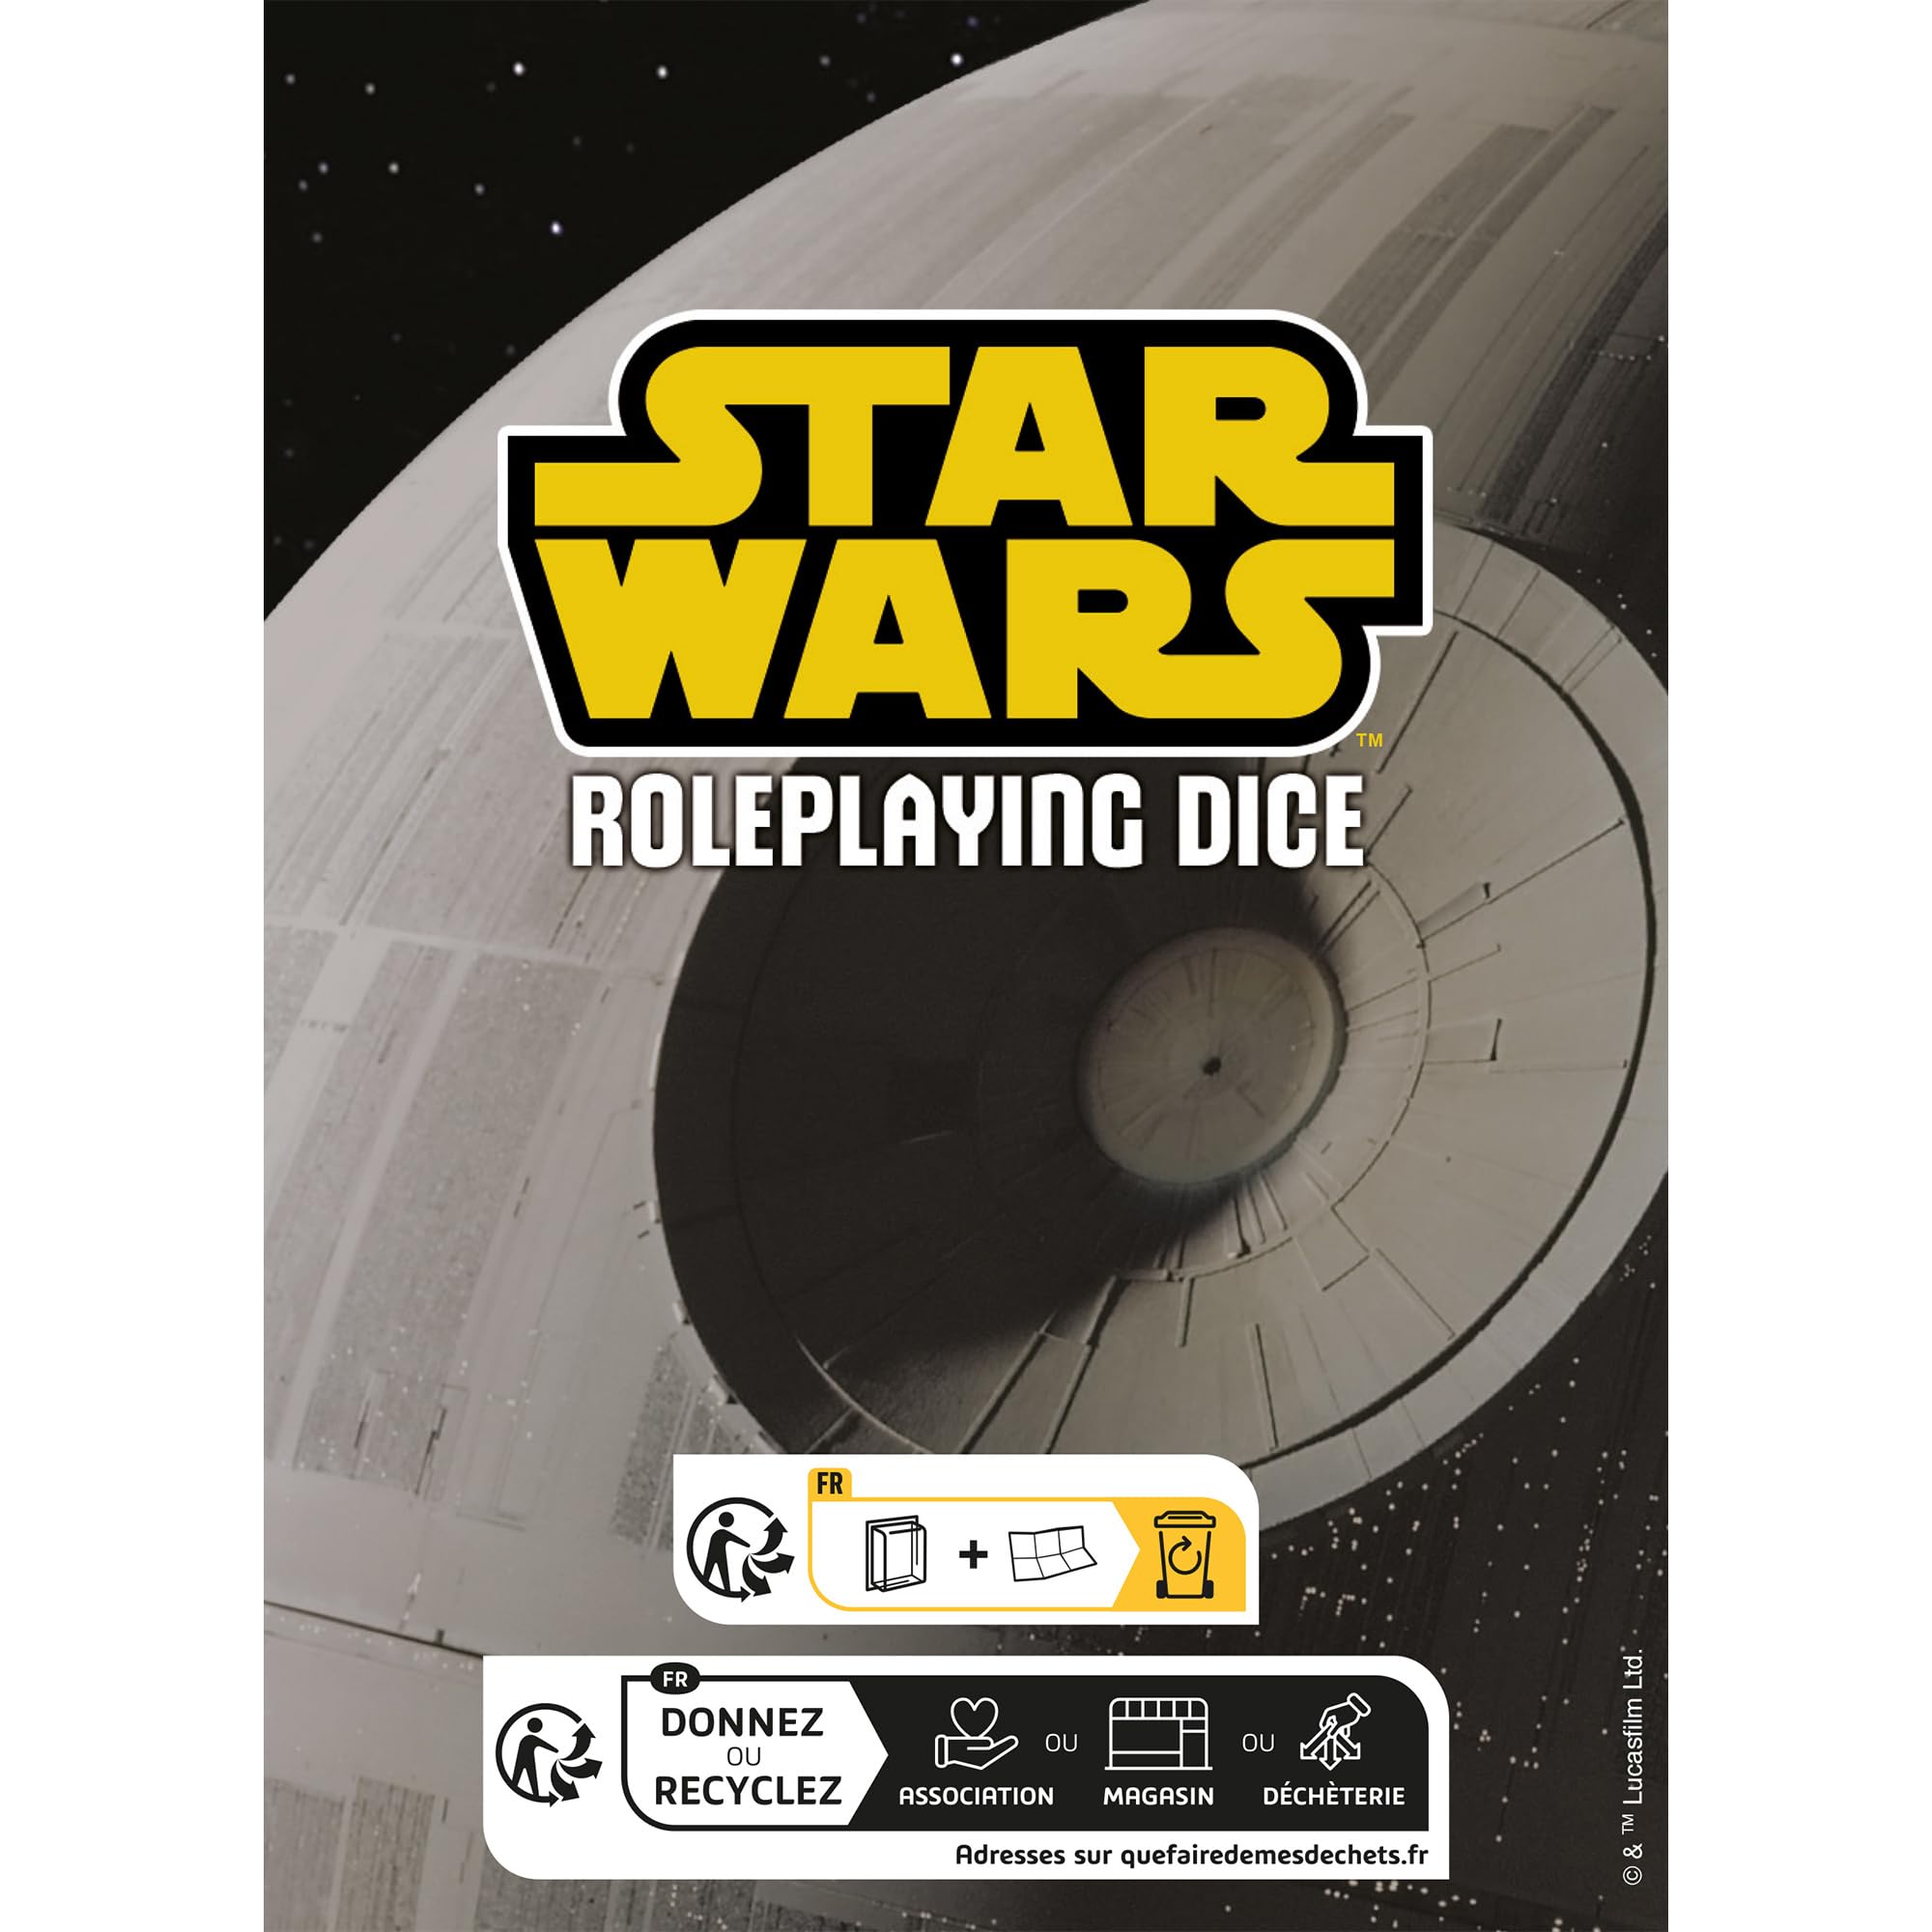 Star Wars Roleplaying Dice - Enhance Your Gameplay and Advance The Star Wars Narrative! Official Accessory for The Star Wars Roleplaying Game, Made by EDGE Studio